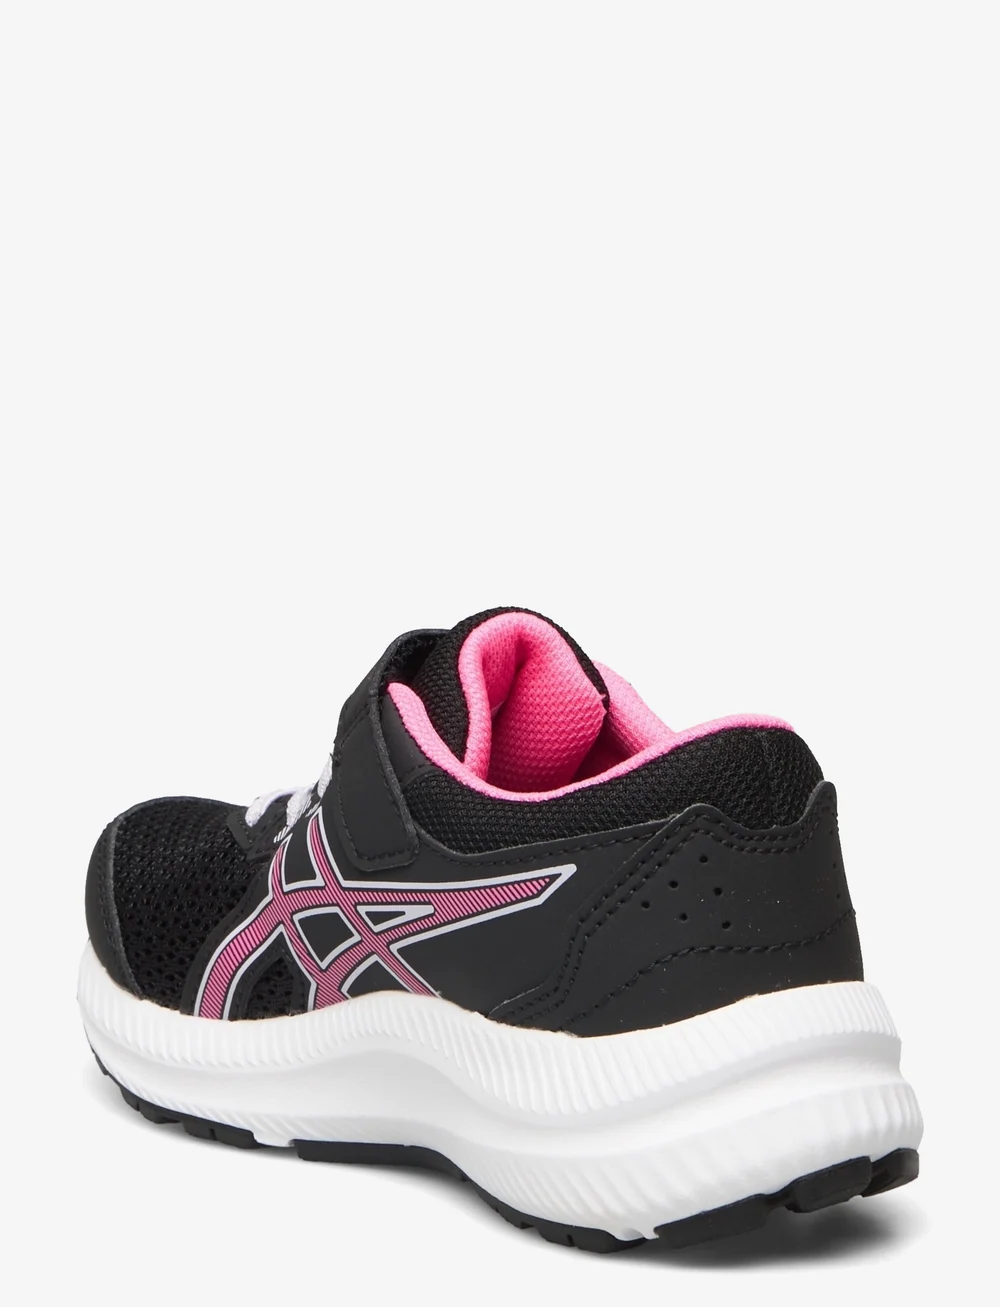 Asics Contend 8 Ps - Sneakers